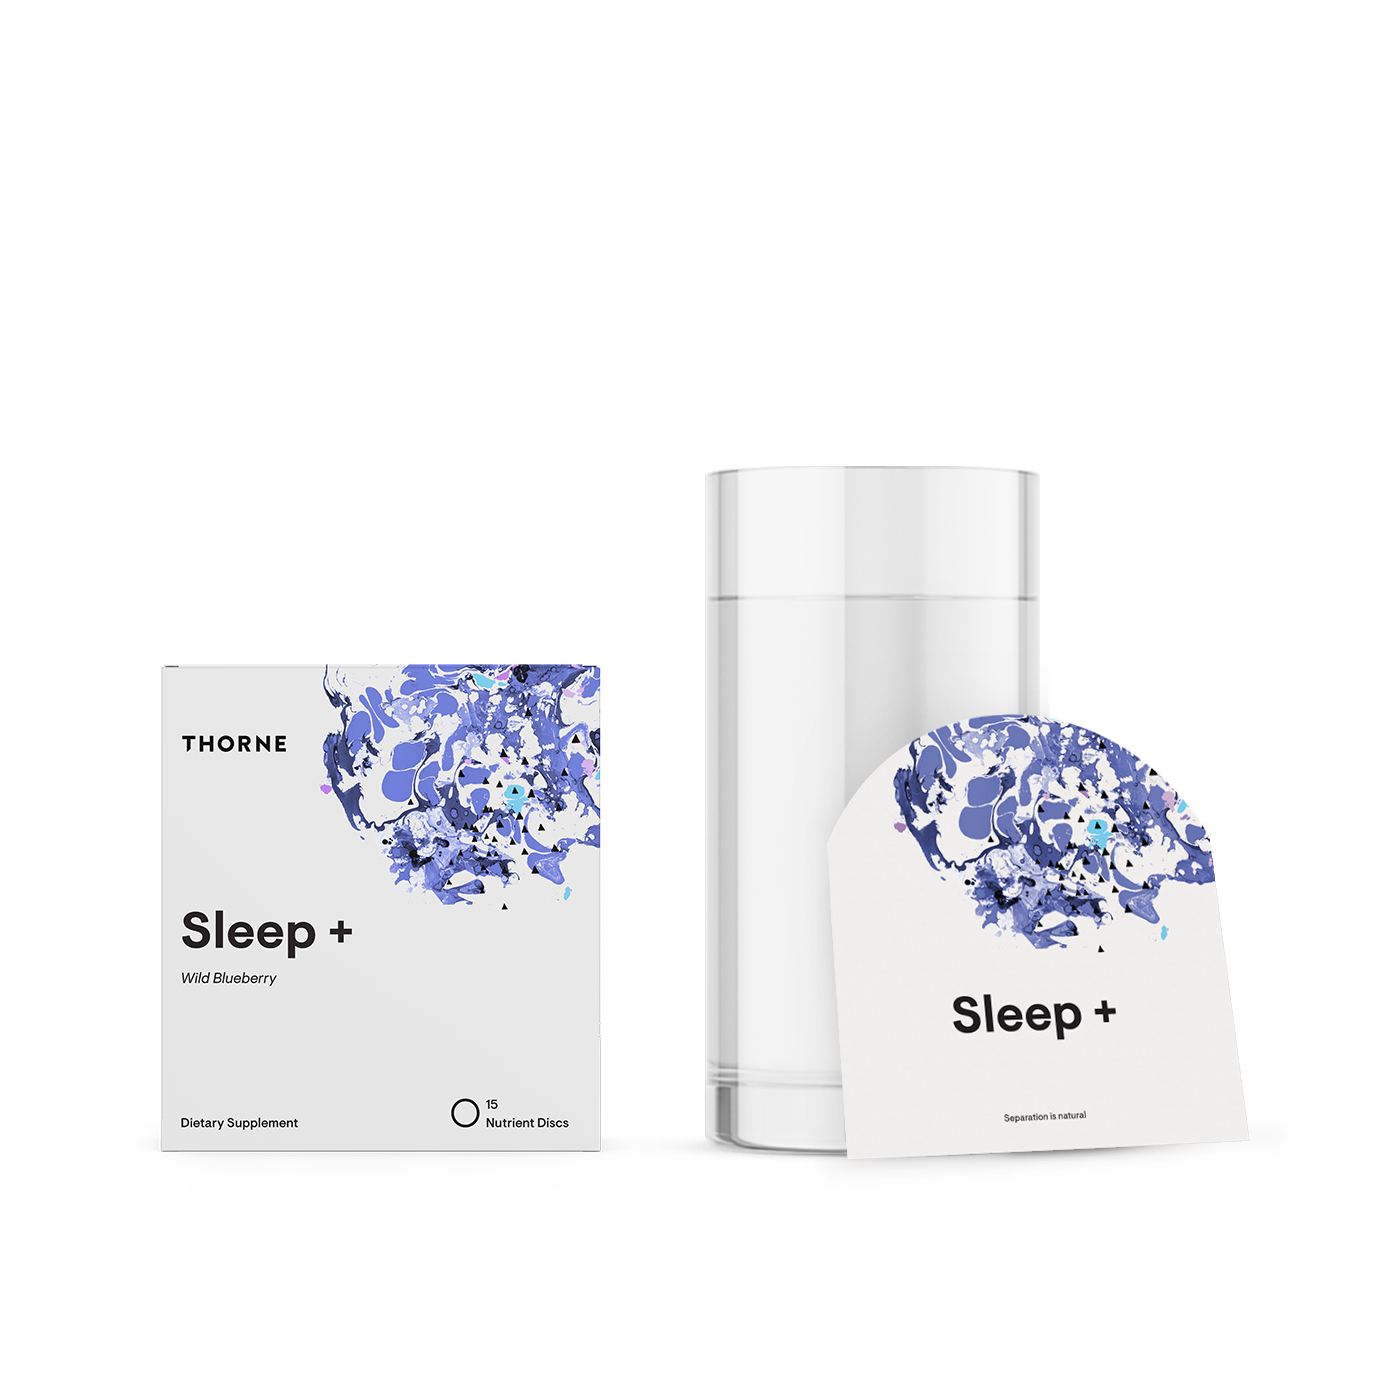 Thorne Research Sleep + $33.00/Bottle of 15 Thorne Research DIS002